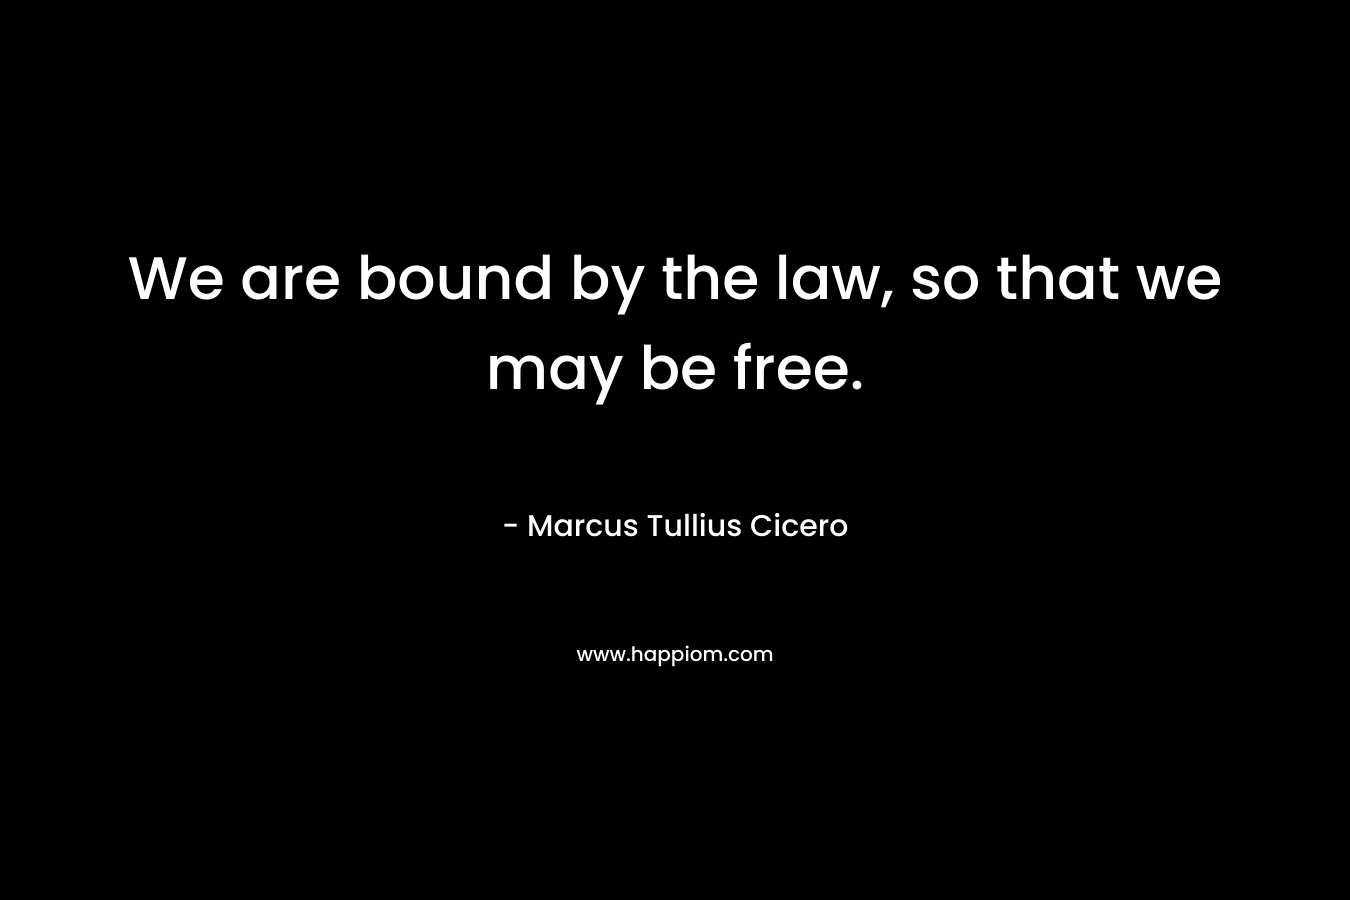 We are bound by the law, so that we may be free.